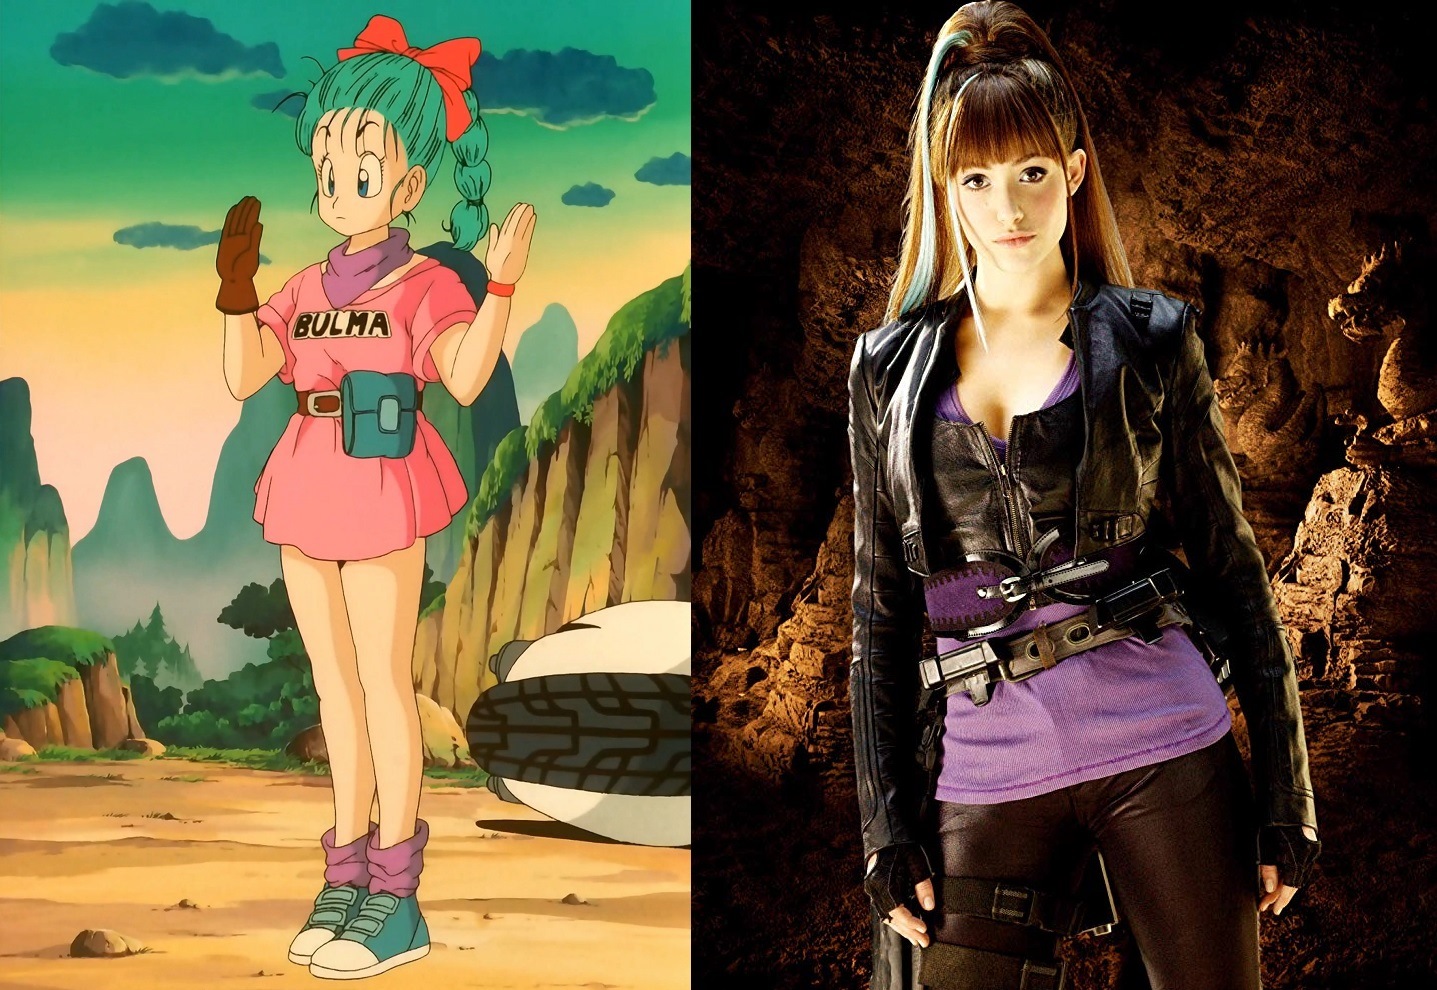 The anime version of Bulma vs Emmy Rossum as the live-action Bulma in Dragonball Evolution (2009)